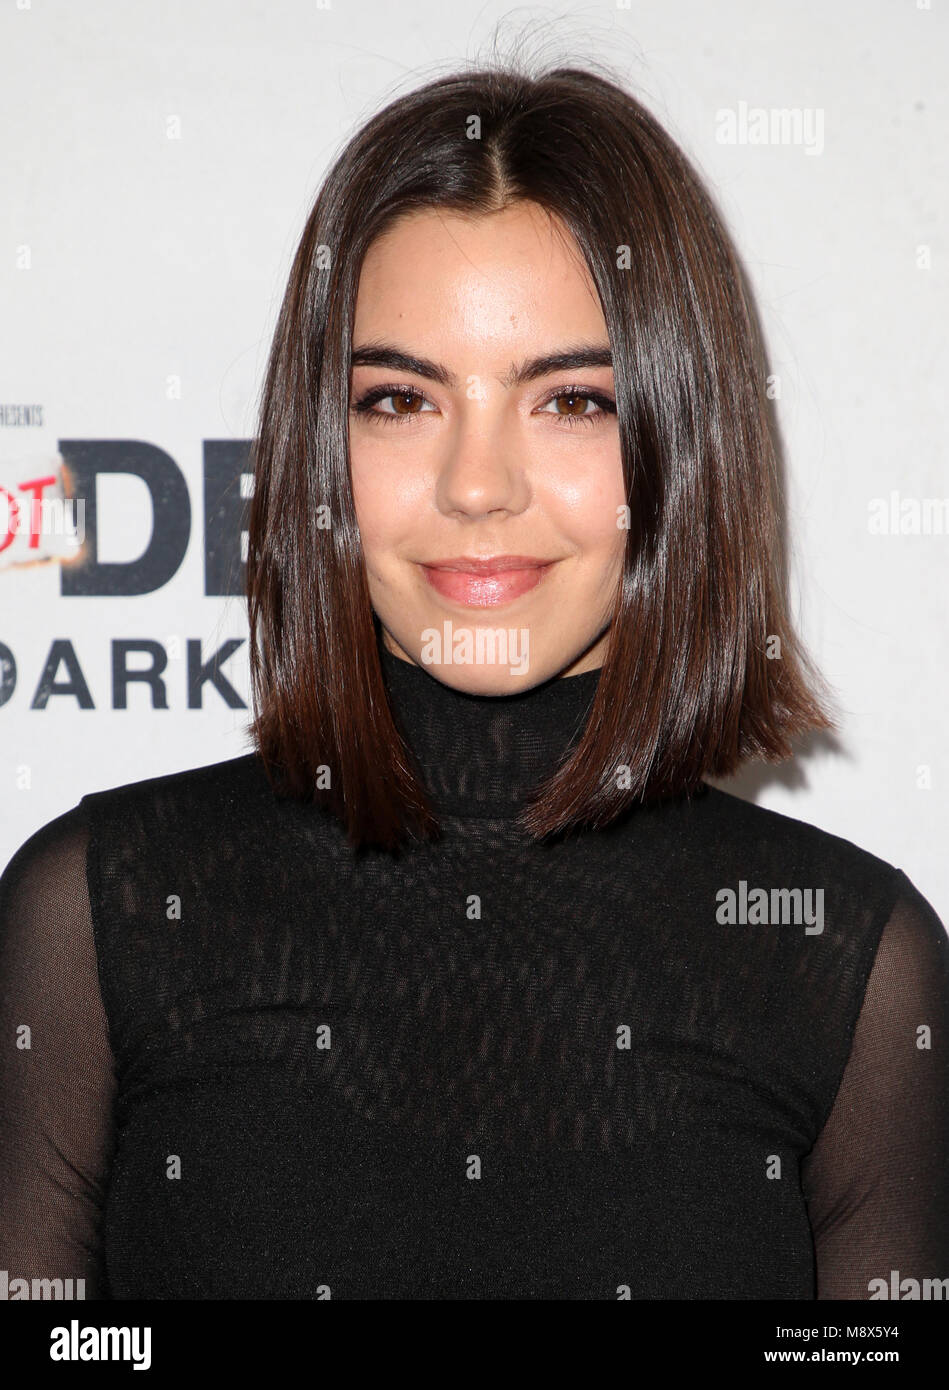 Hollywood, Ca. 20th Mar, 2018. Samantha Boscarino, at the 'God's Not Dead: A Light in Darkness' premiere at American Cinematheque's Egyptian Theatre on March 20, 2018 in Hollywood, California. Credit: Faye Sadou/Media Punch/Alamy Live News Stock Photo